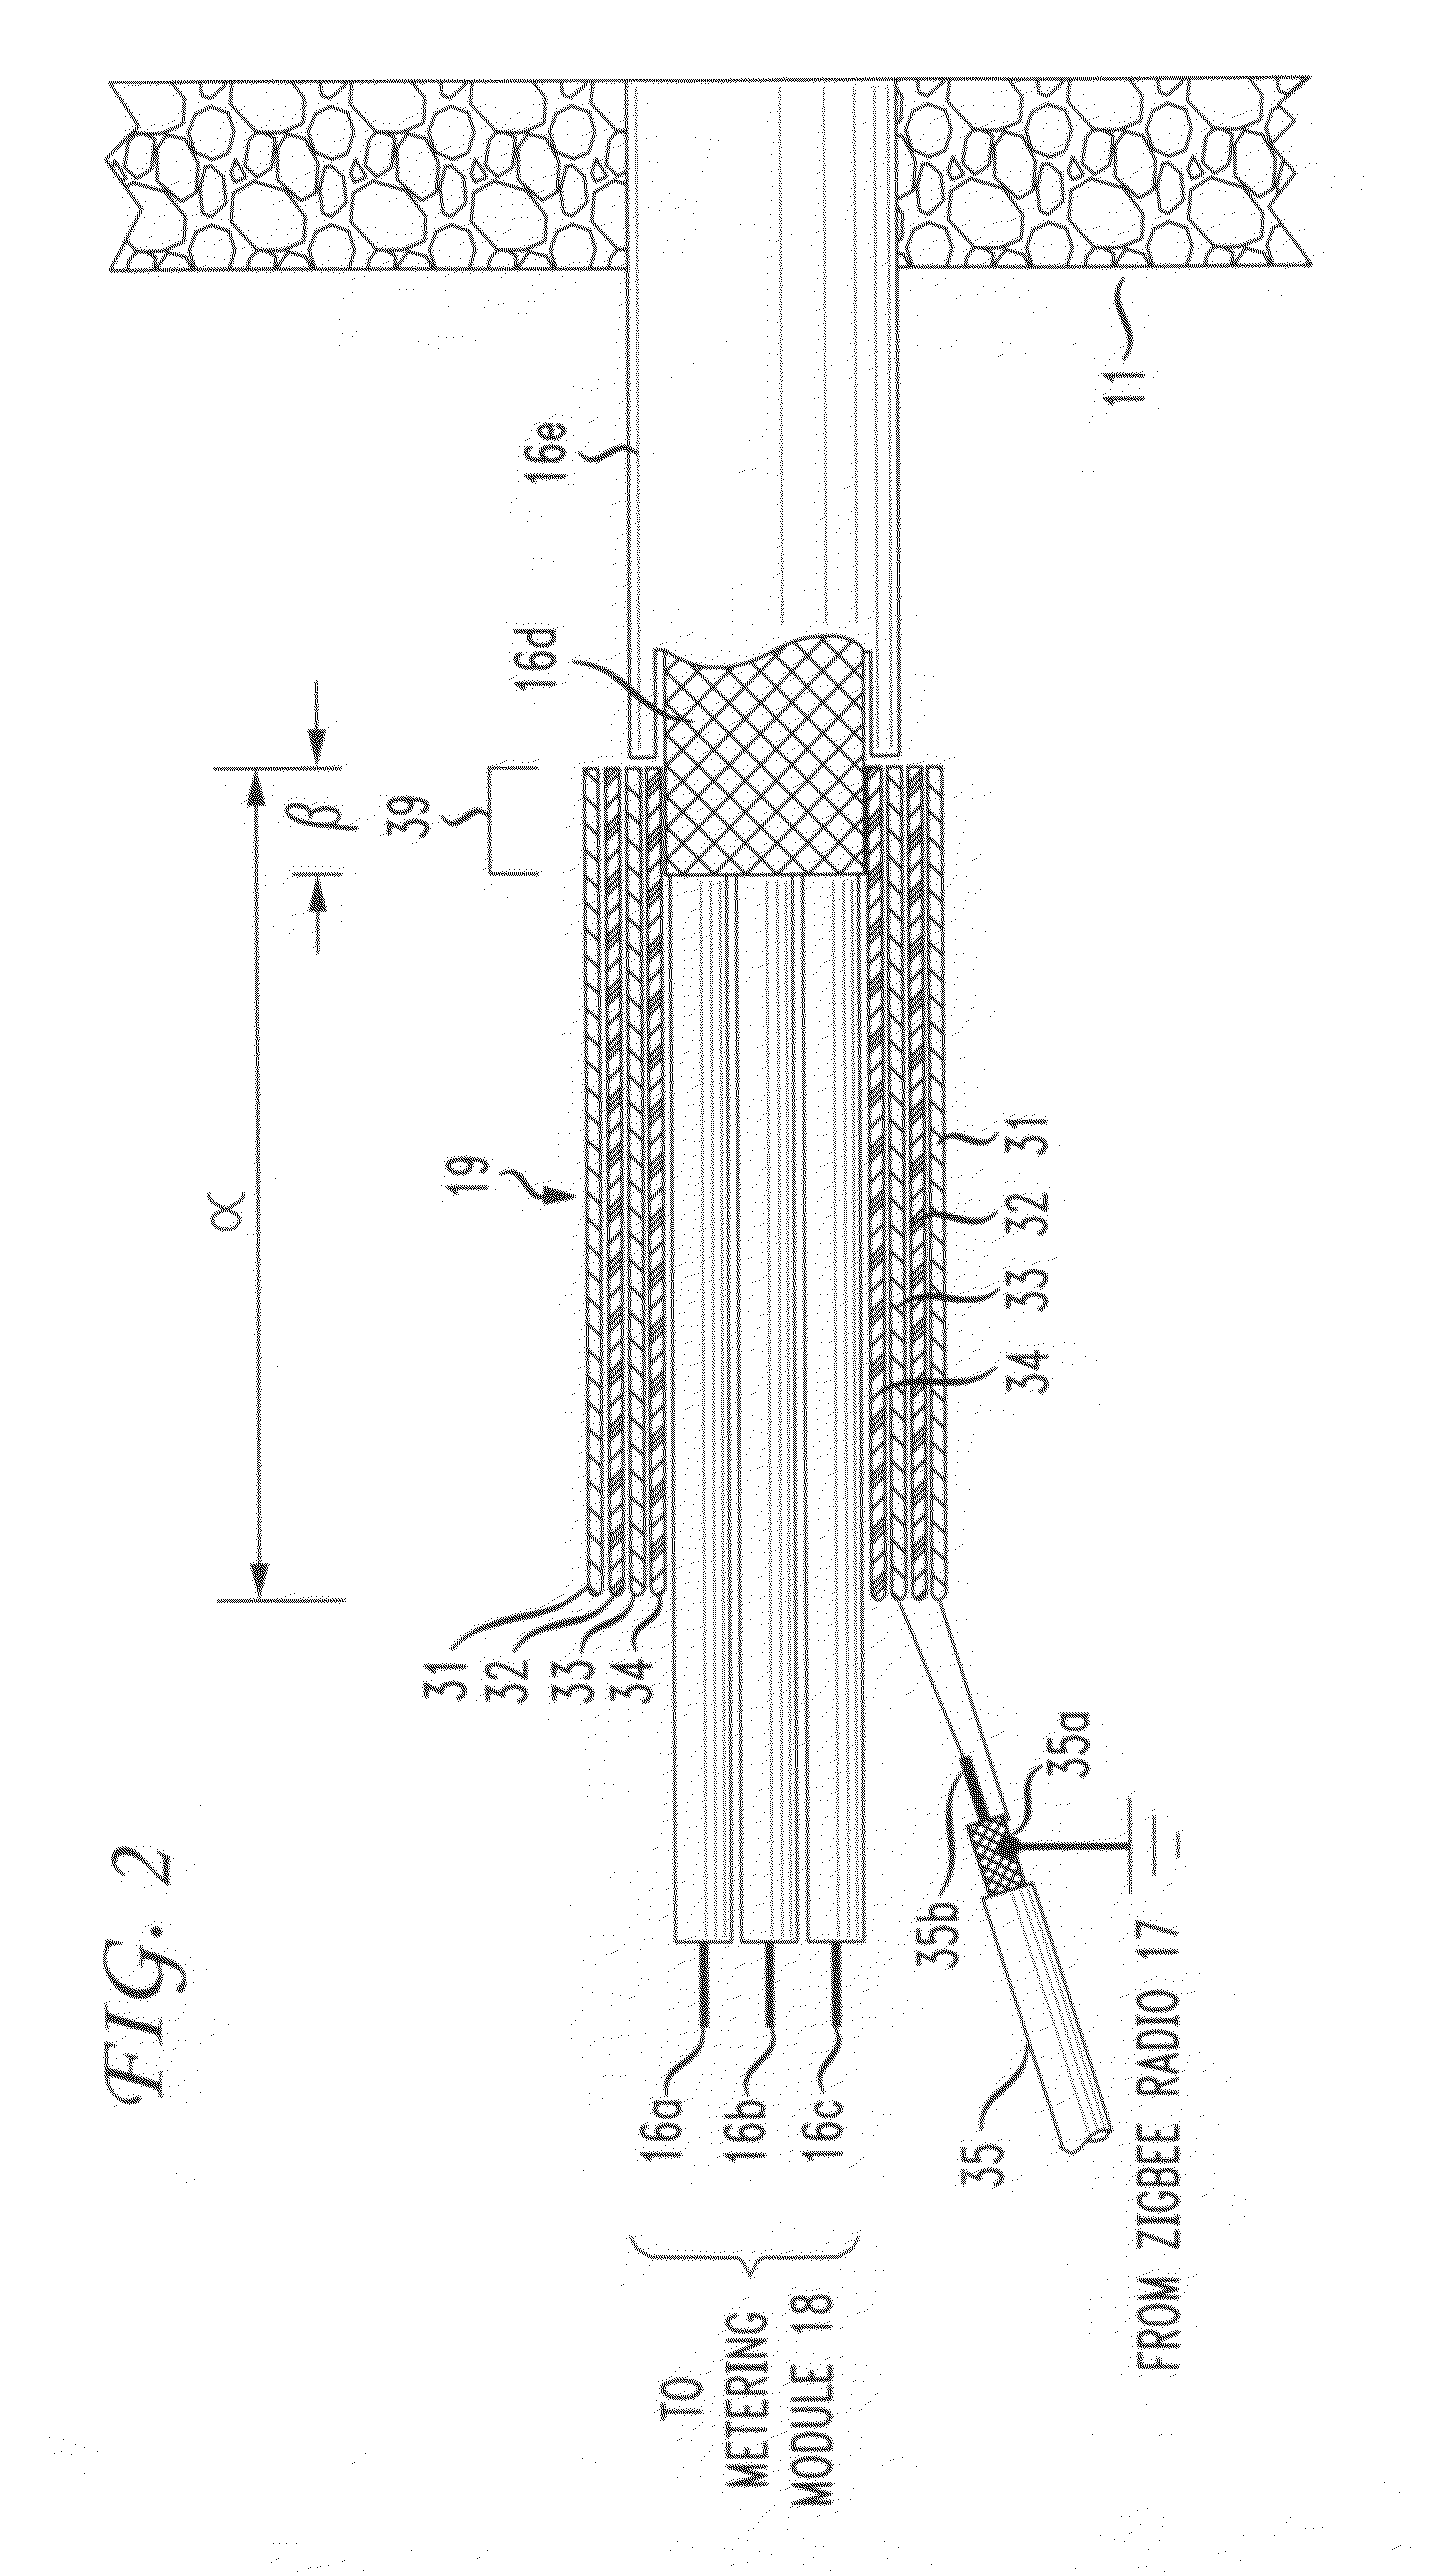 Using an electric power cable as the vehicle for communicating an information-bearing signal through a barrier